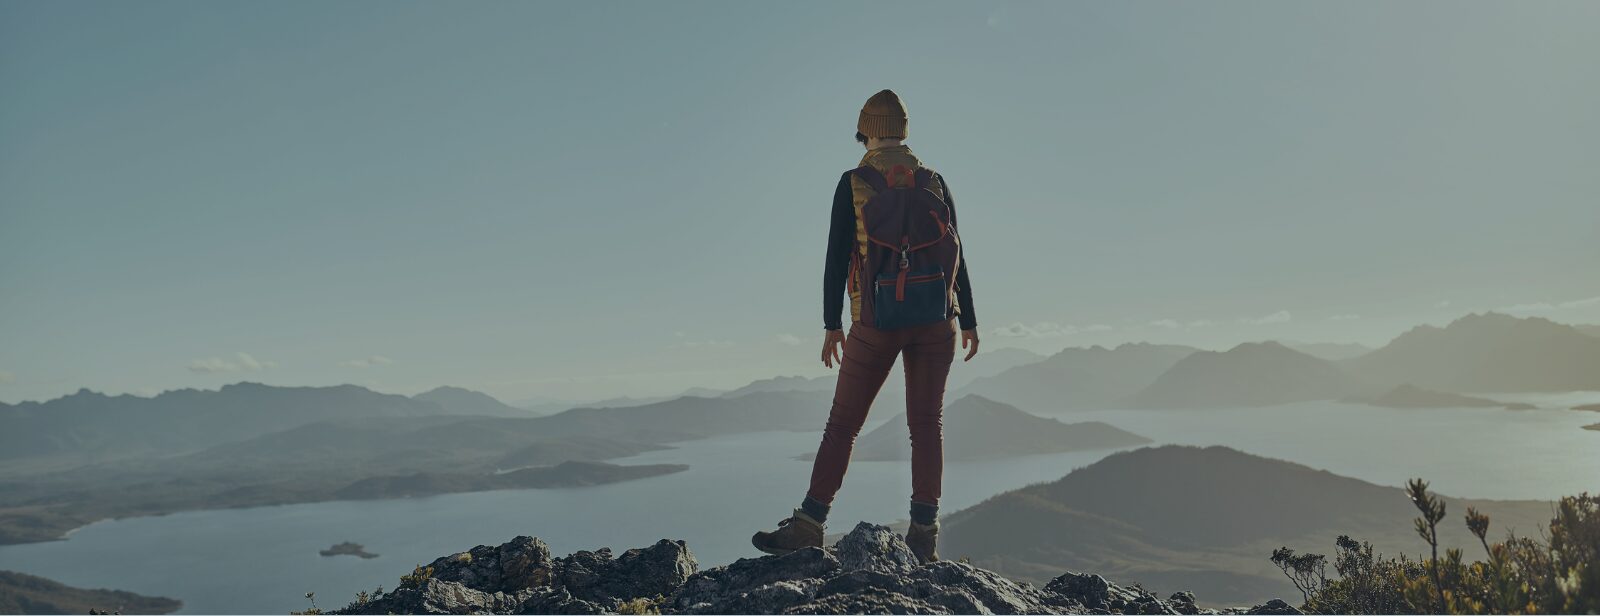 Woman hiker standing atop a peak overlooking a vast open landscape with a large lake